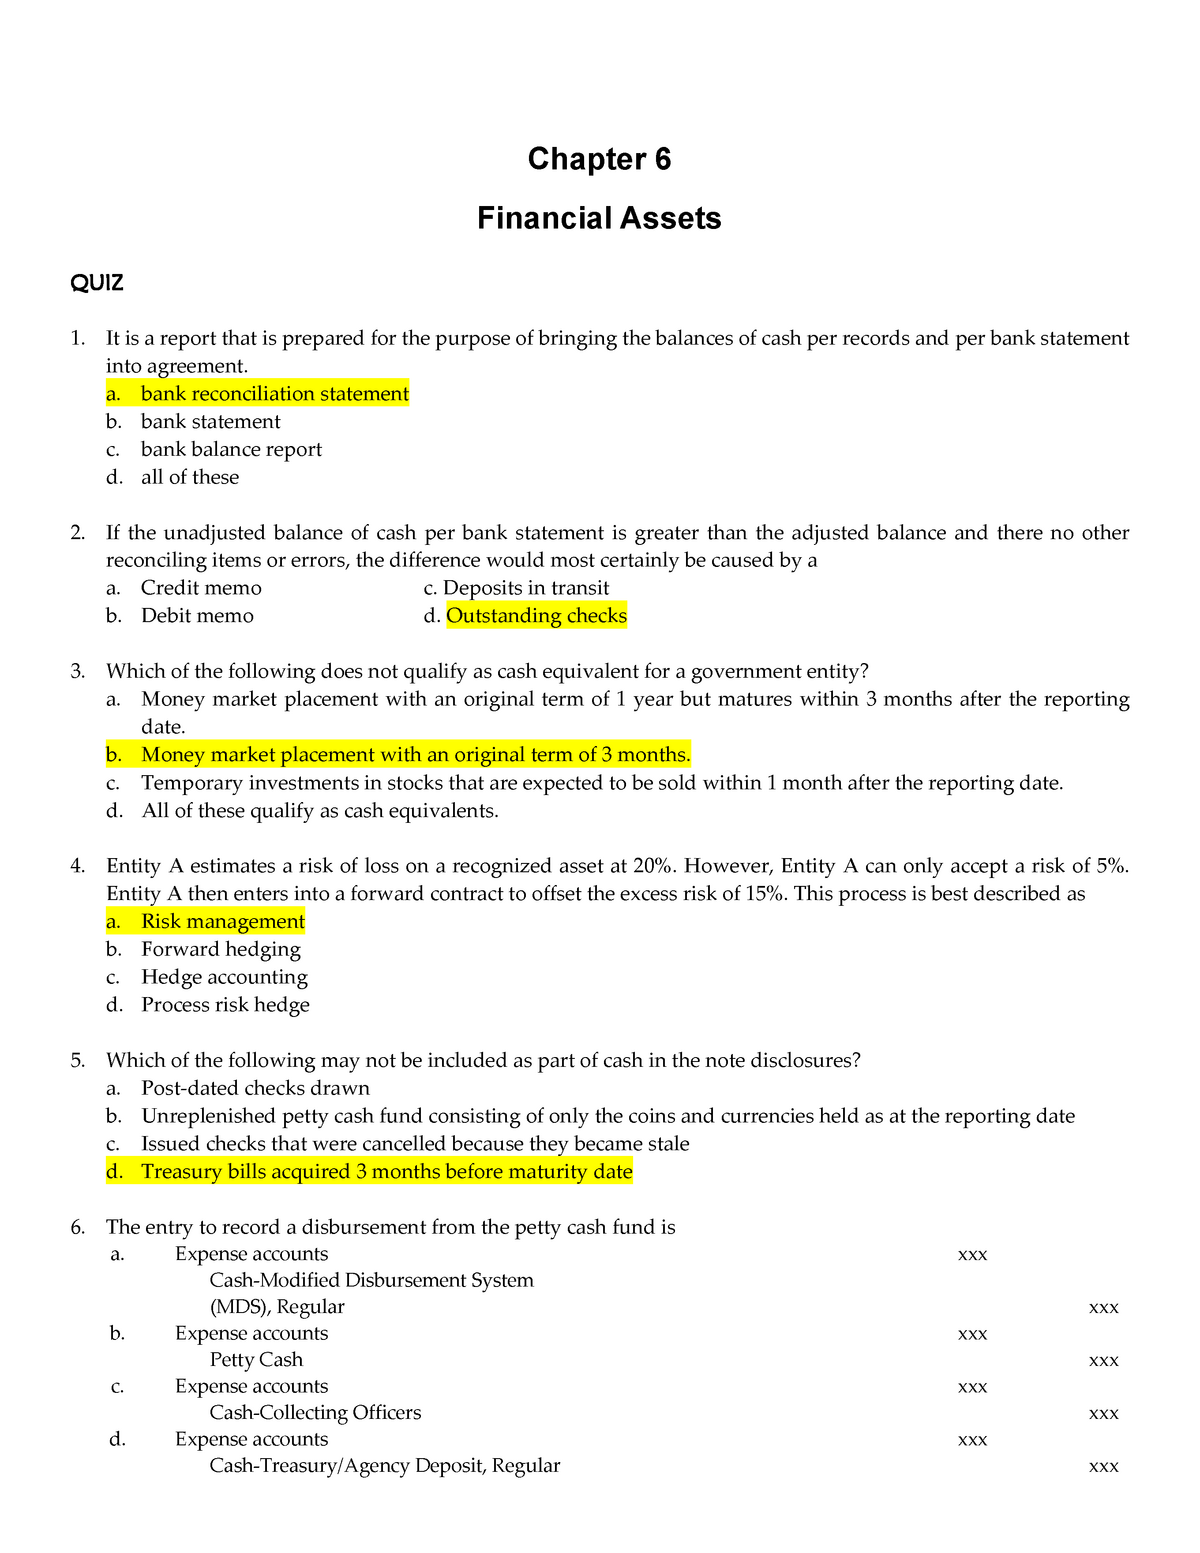 acctg-11-finals-q2-and-q3-answerkey-chapter-6-financial-assets-quiz